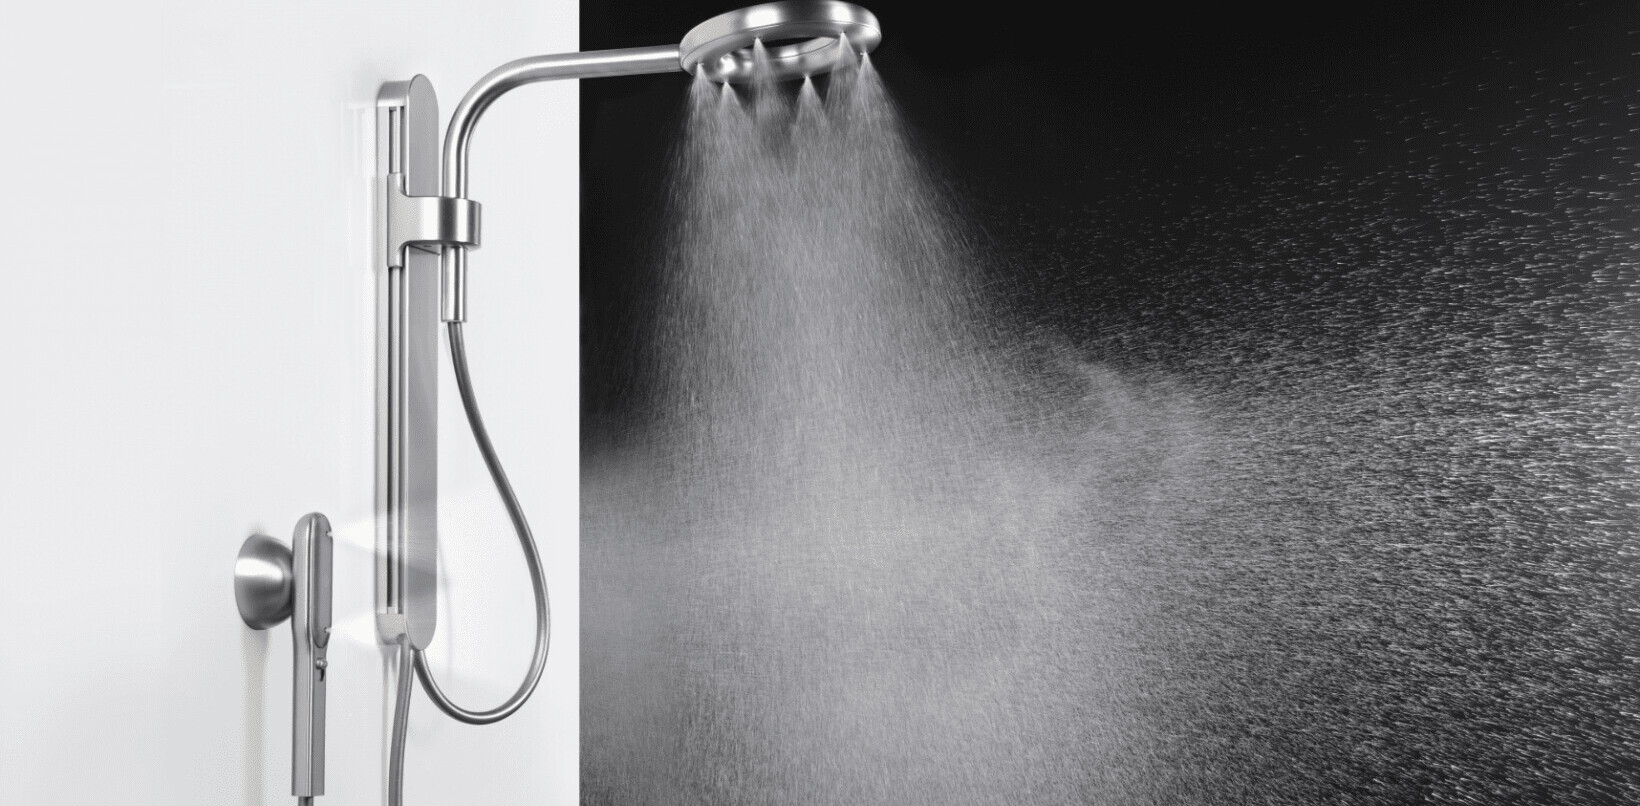 Nebia’s new showerhead helps you save more water with fewer compromises